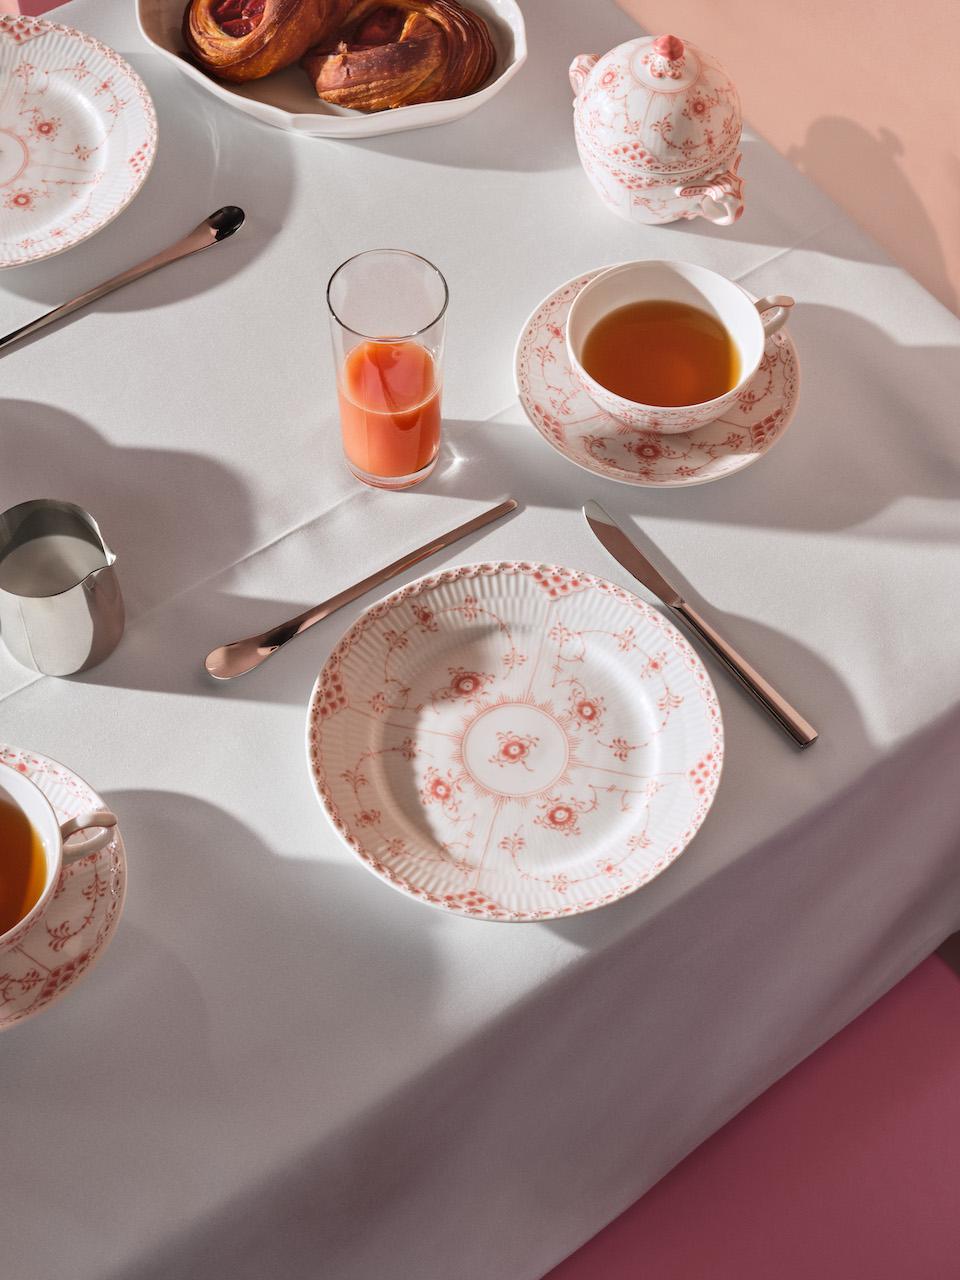 Century-Old Danish Tableware Brand Now in Coral Colour, Adding Contemporary Charm to Dining Tables